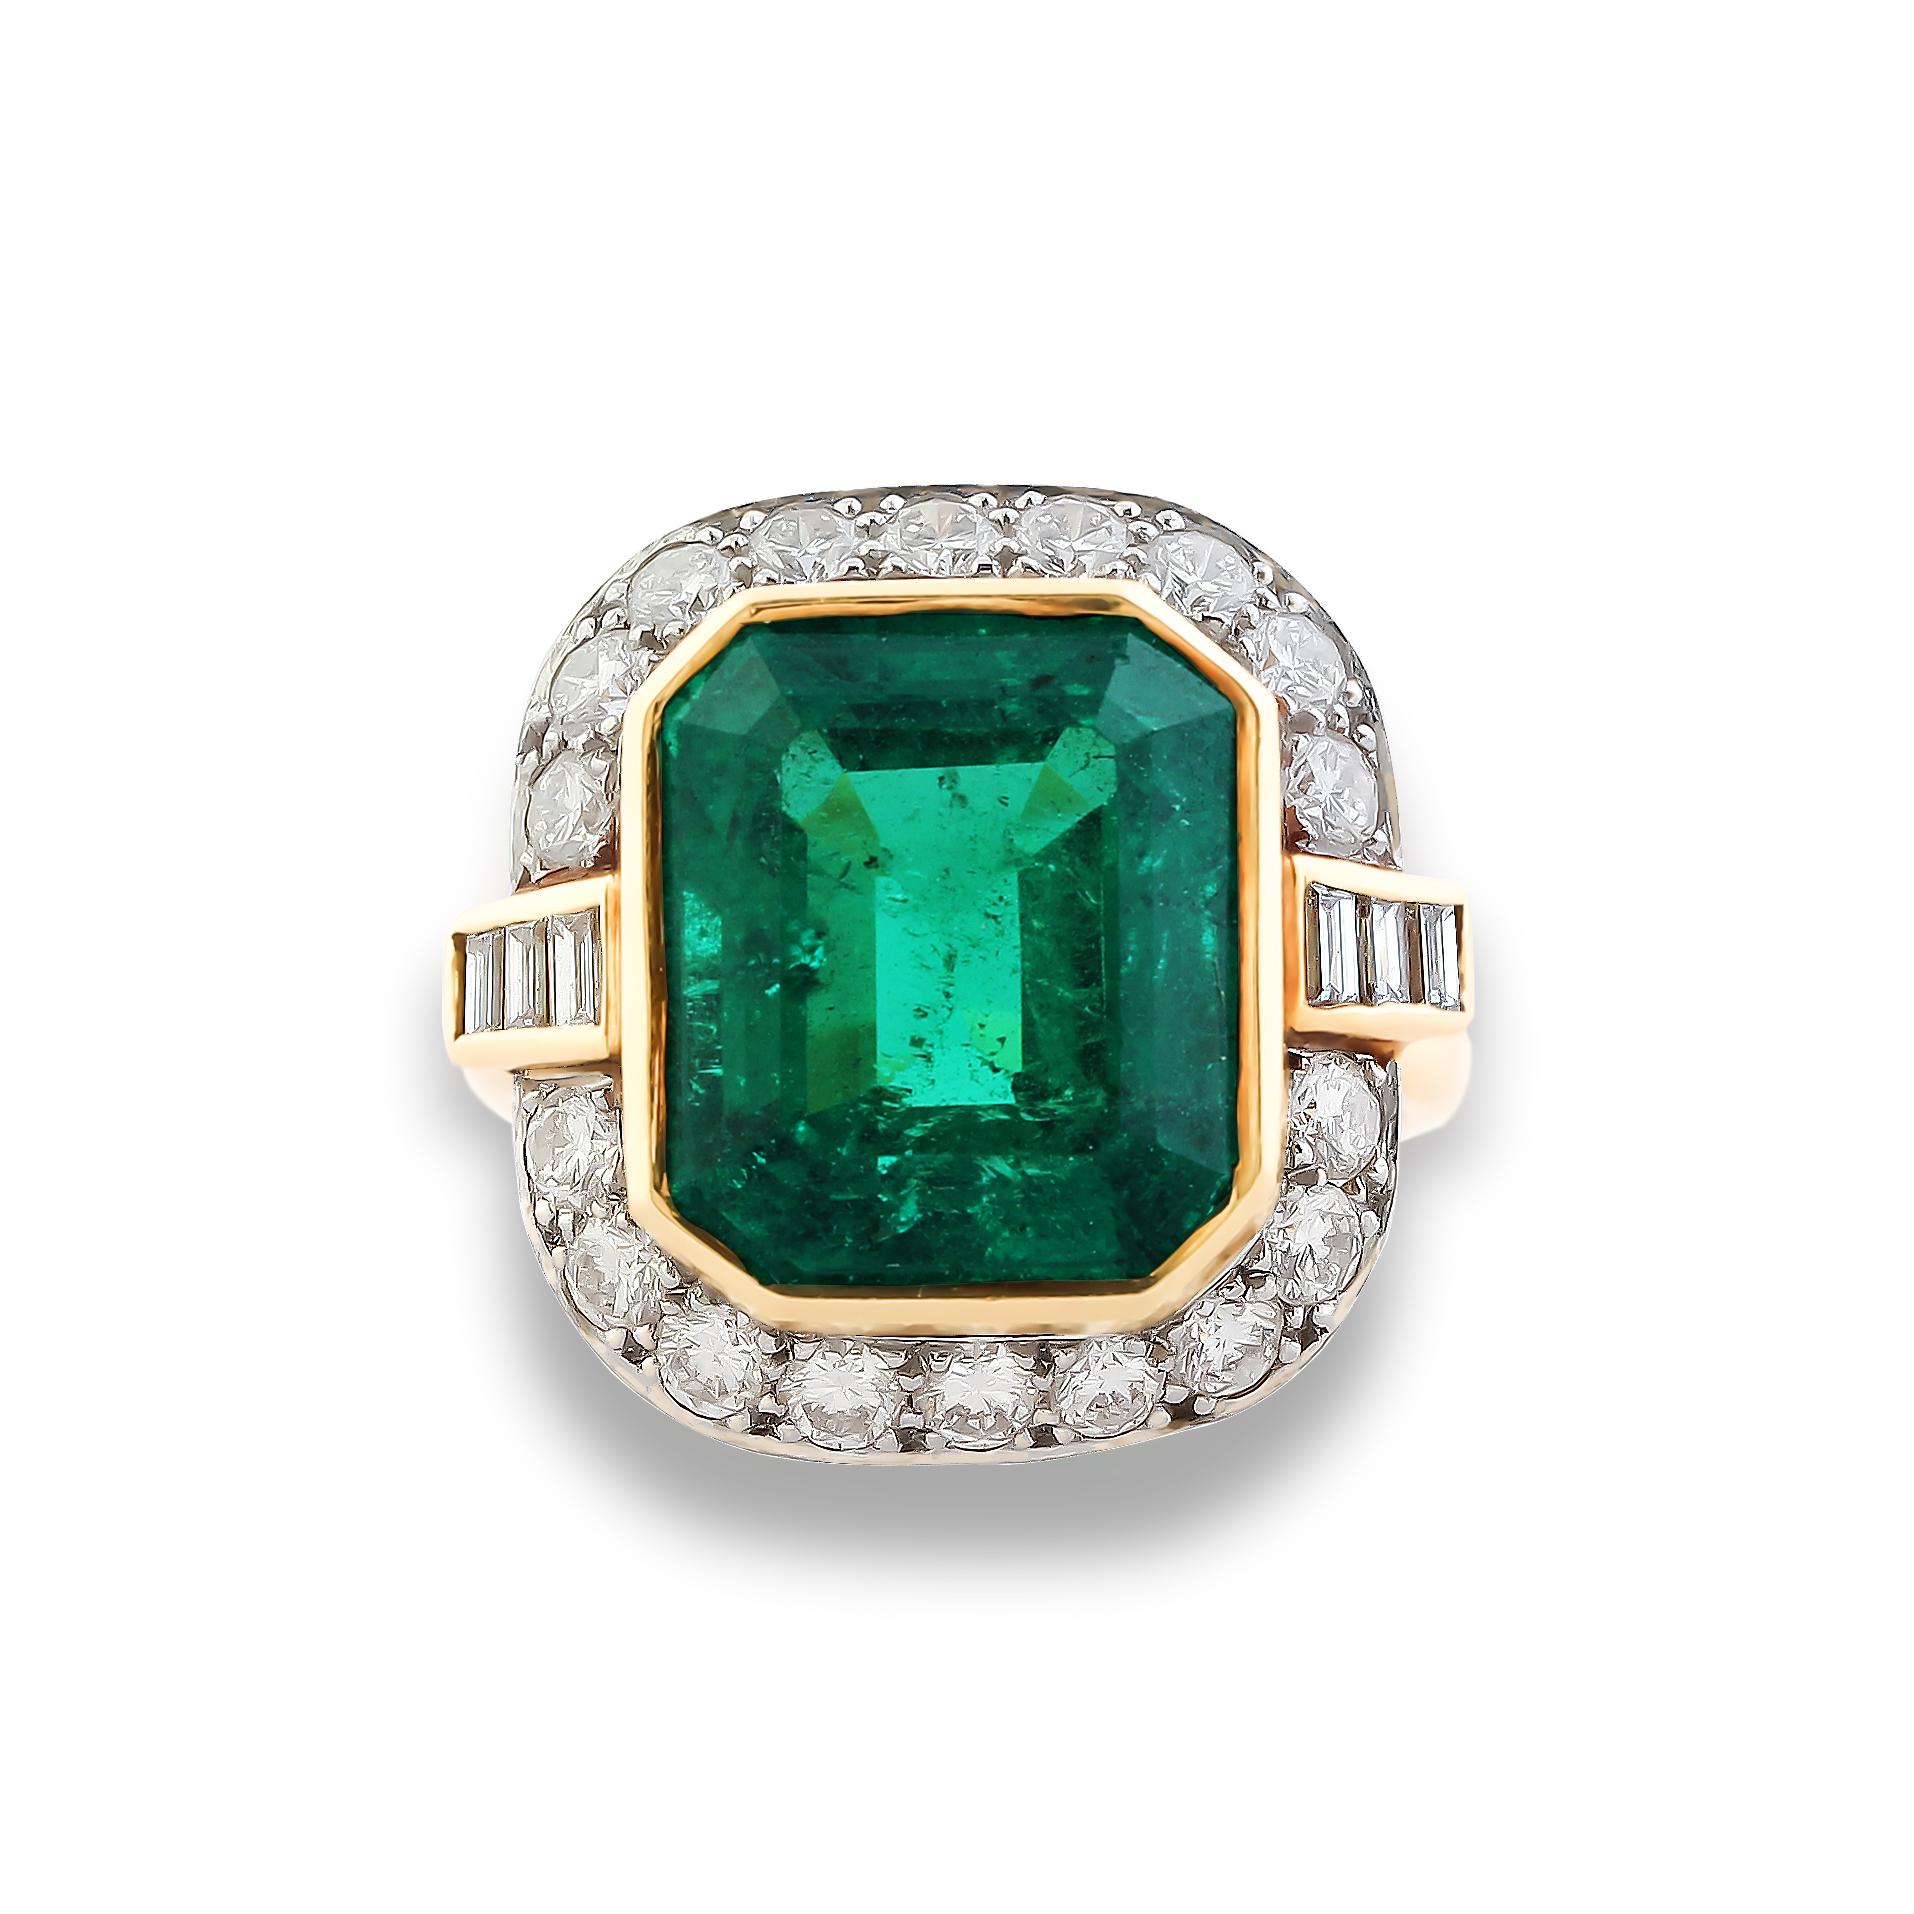 An elegant emerald and diamond engagement ring, set at the centre with a 7.20 carat emerald-cut Colombian emerald in a surround of round brilliant-cut diamonds and flanked by baguette-cut diamonds. Mounted in 18k yellow gold, circa 1960s. This piece